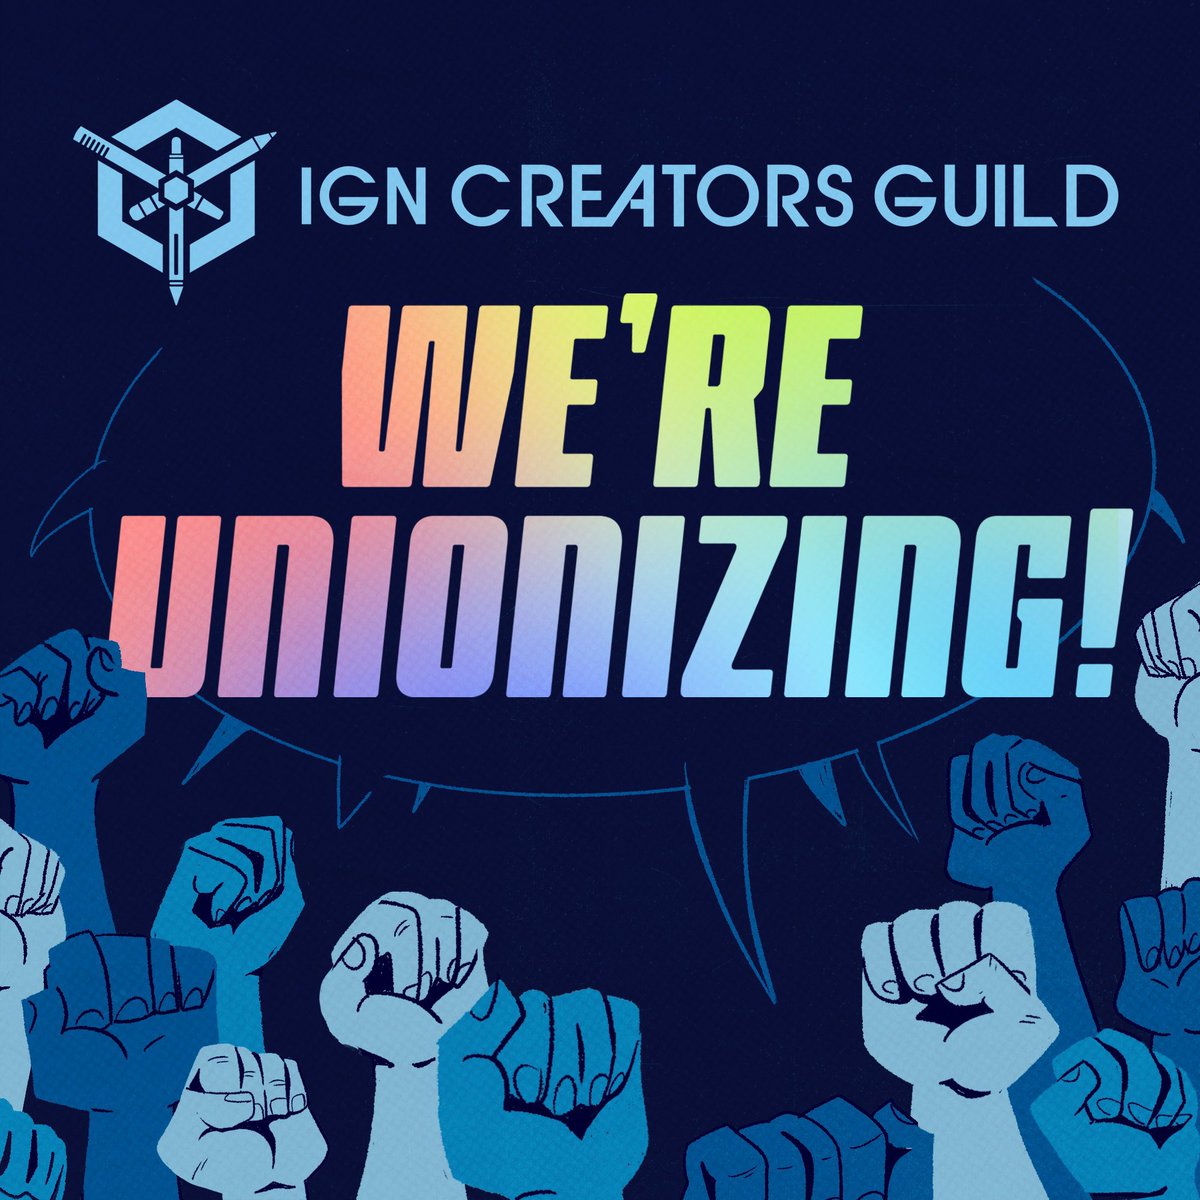 My colleagues and I have banded together to form the IGN Creators Guild! And we, the folks that create the articles, videos, guides, art and more are here asking @ZiffDavis and @IGN management to voluntarily recognize @IGNUnion today! #IGNCG